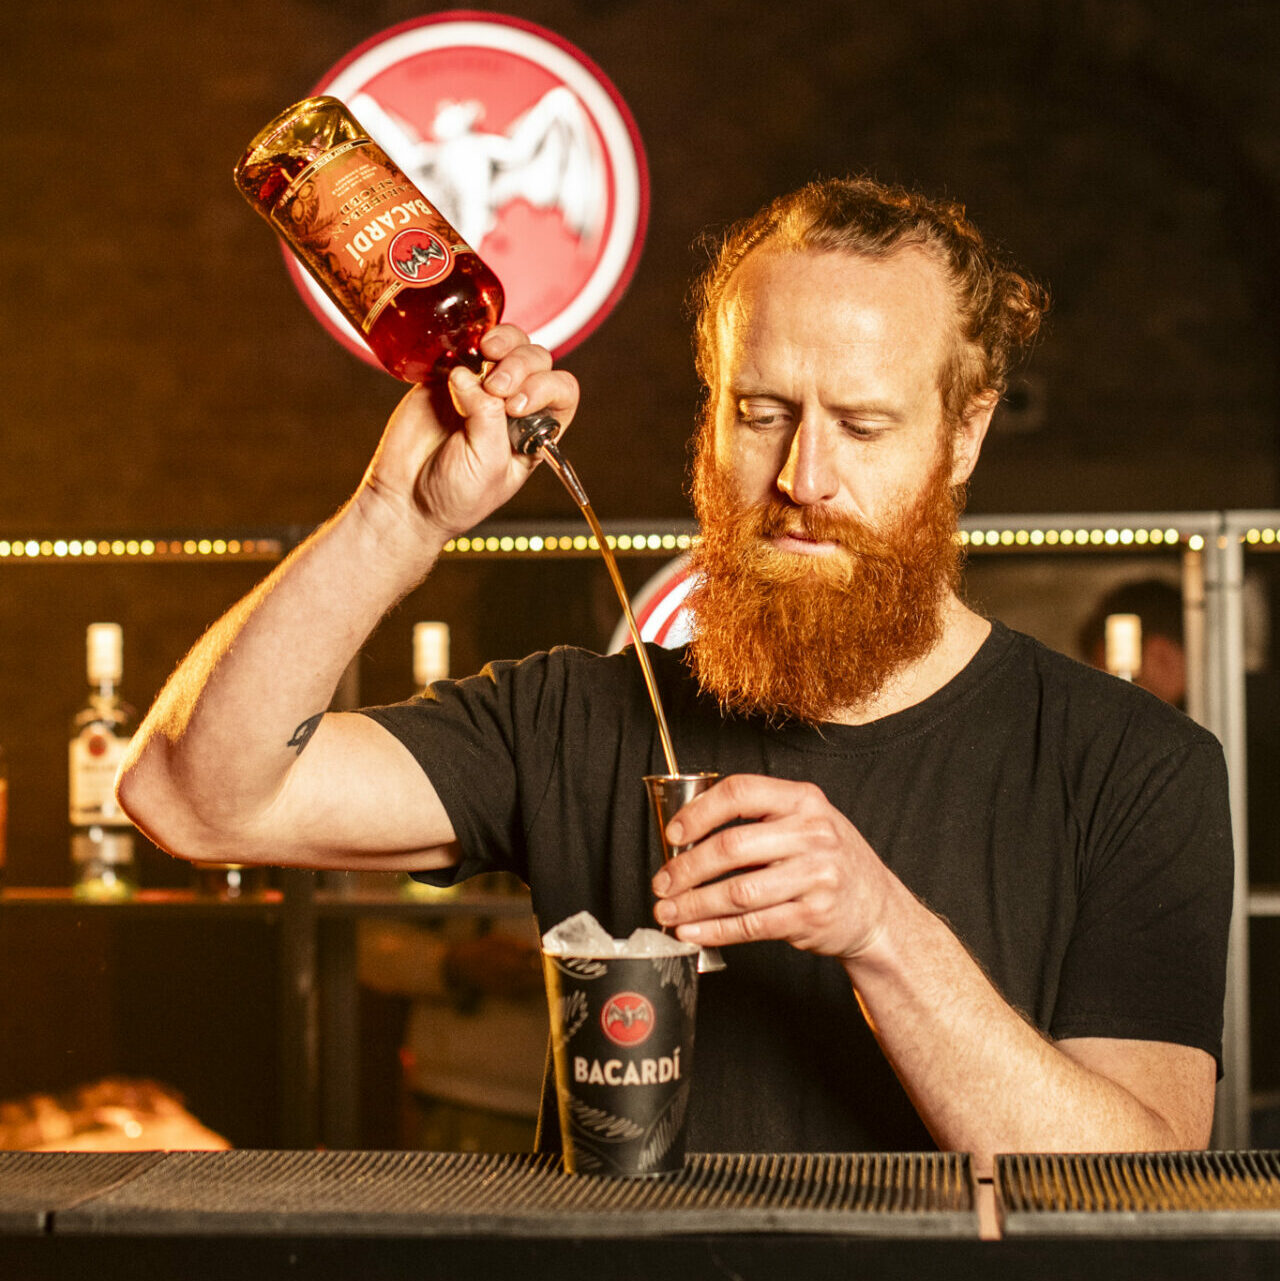 A white man with red hair and beard pours  Bacardí into a glass while standing at a bar